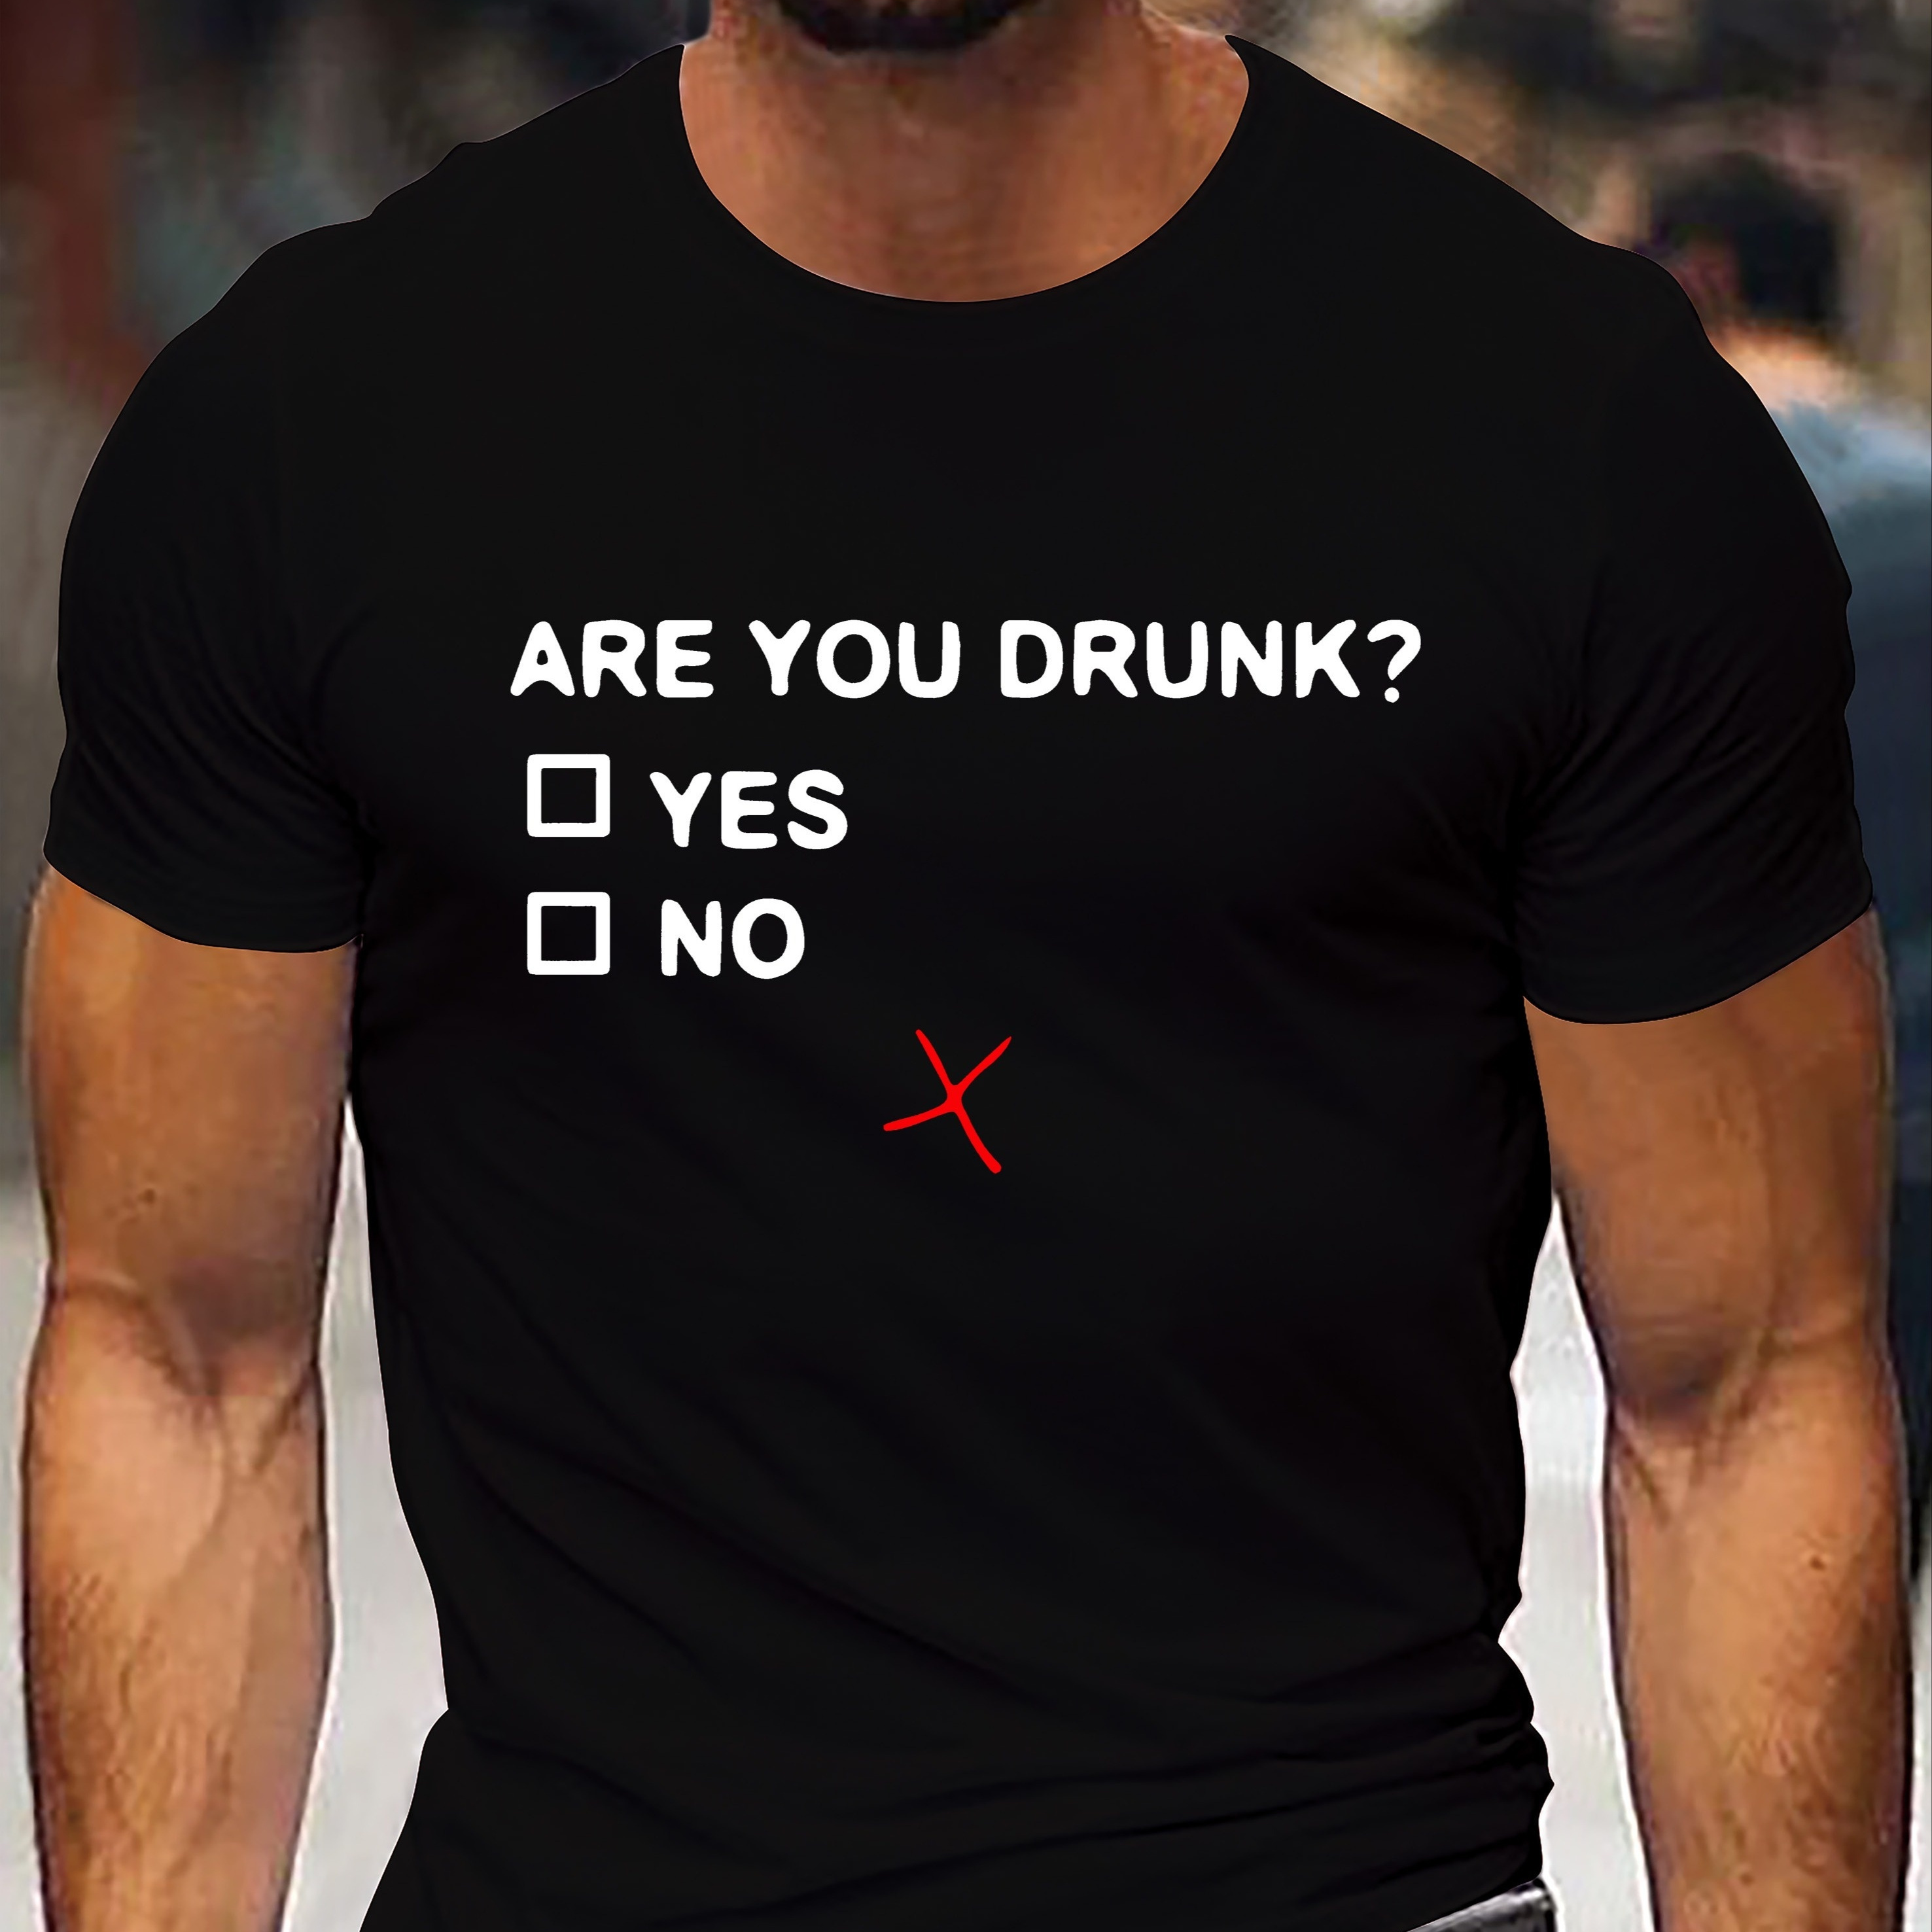 

Are You Drunk" Letter Creative Print Men's Casual T-shirt, Summer Fashion Crew Neck Short Sleeve Top, Modern Streetwear Style For Men